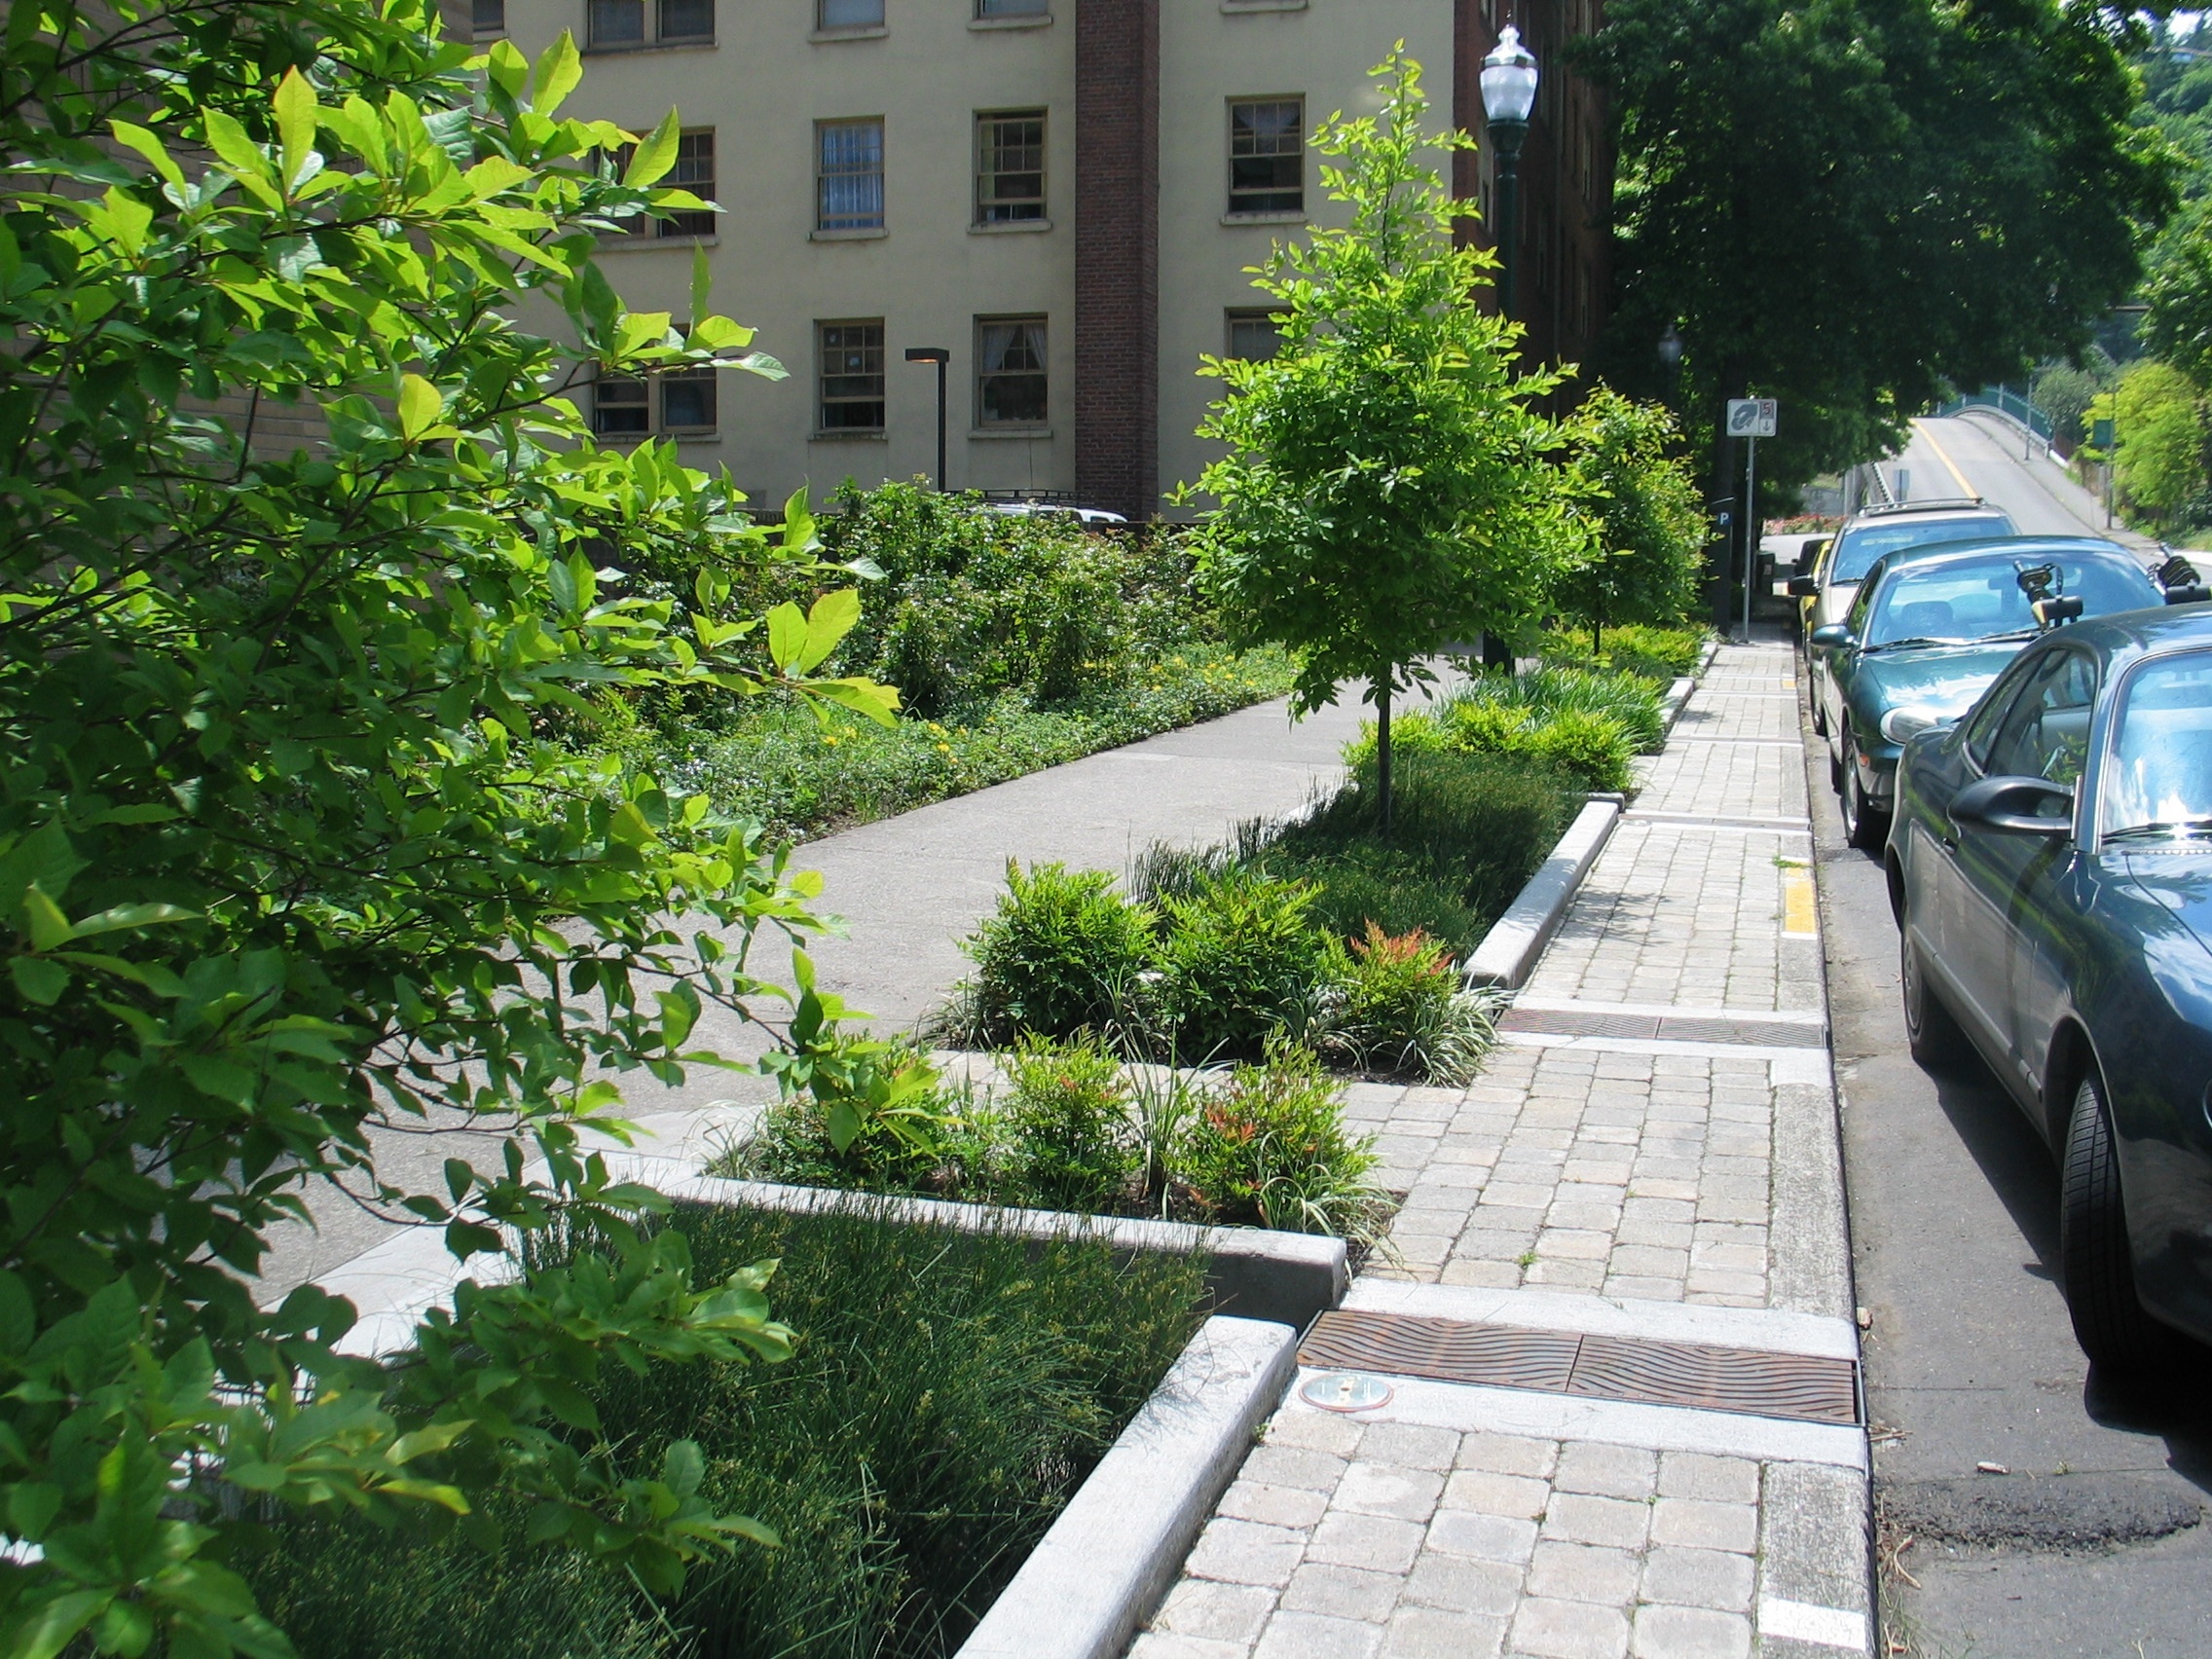 Street planters are used to absorb and hold storm water, keeping it from overrunning combined sewer systems.